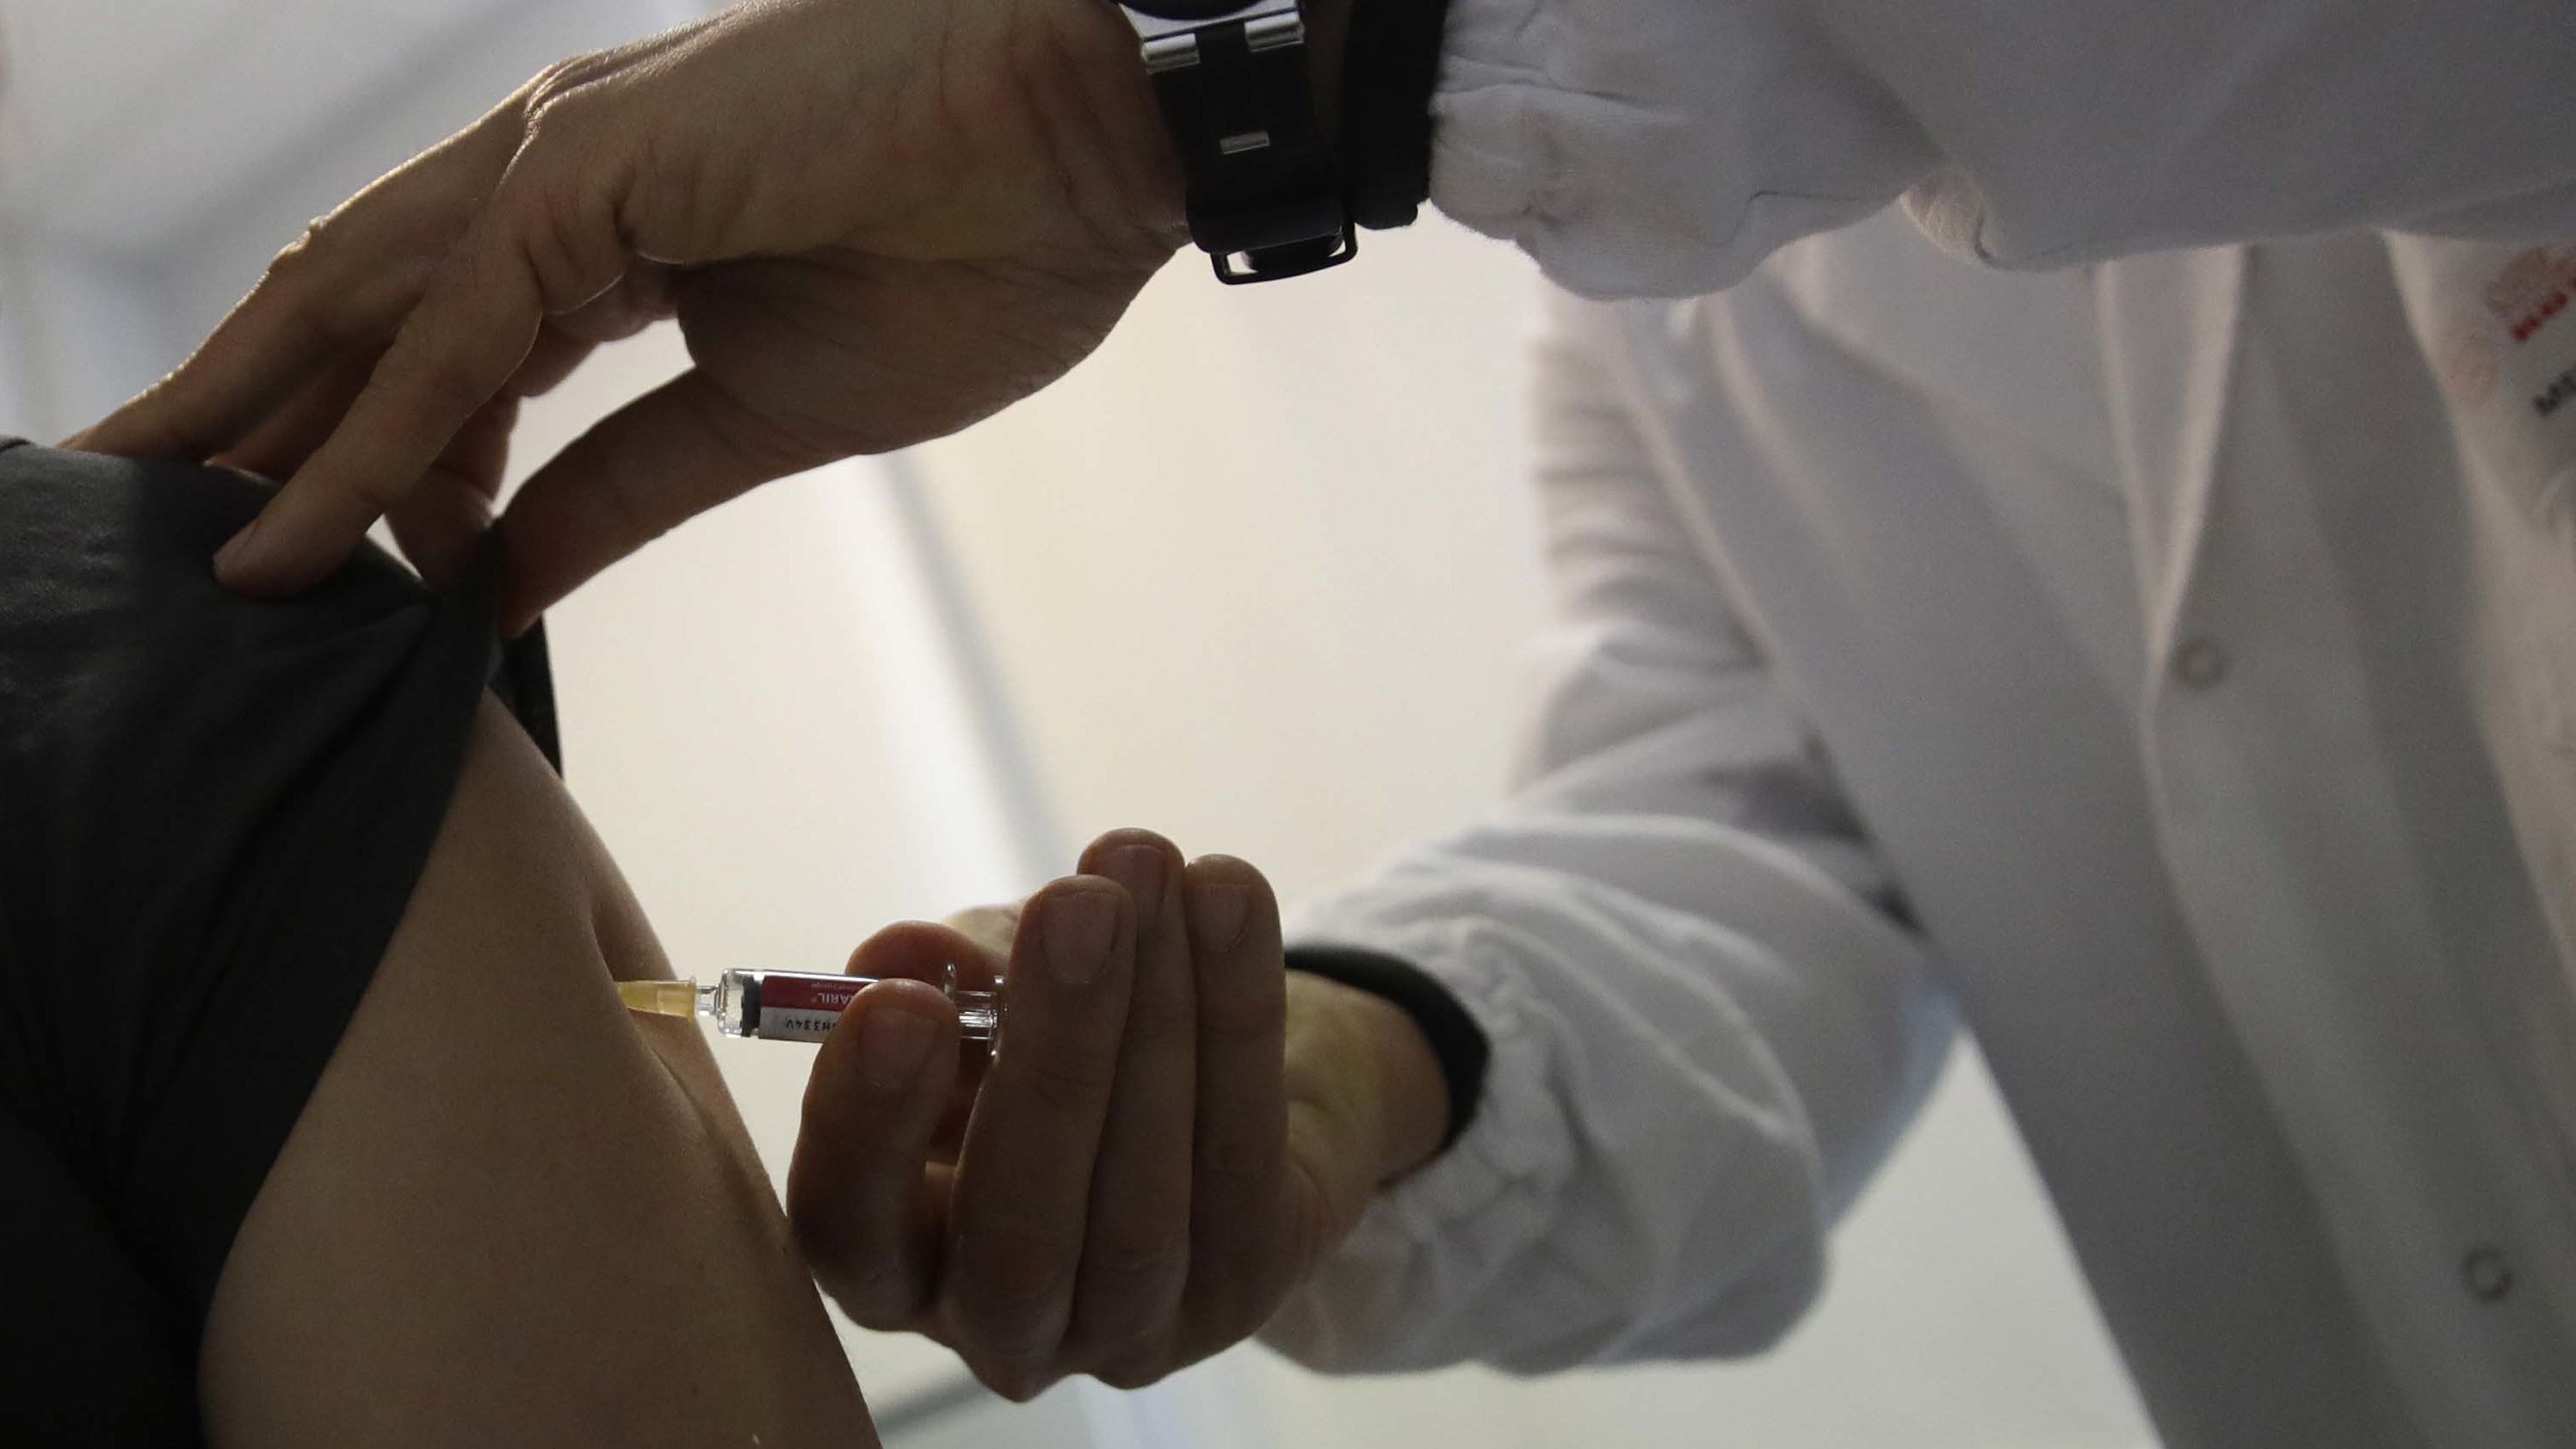 Italian doctor vaccinated a patient against measles. 